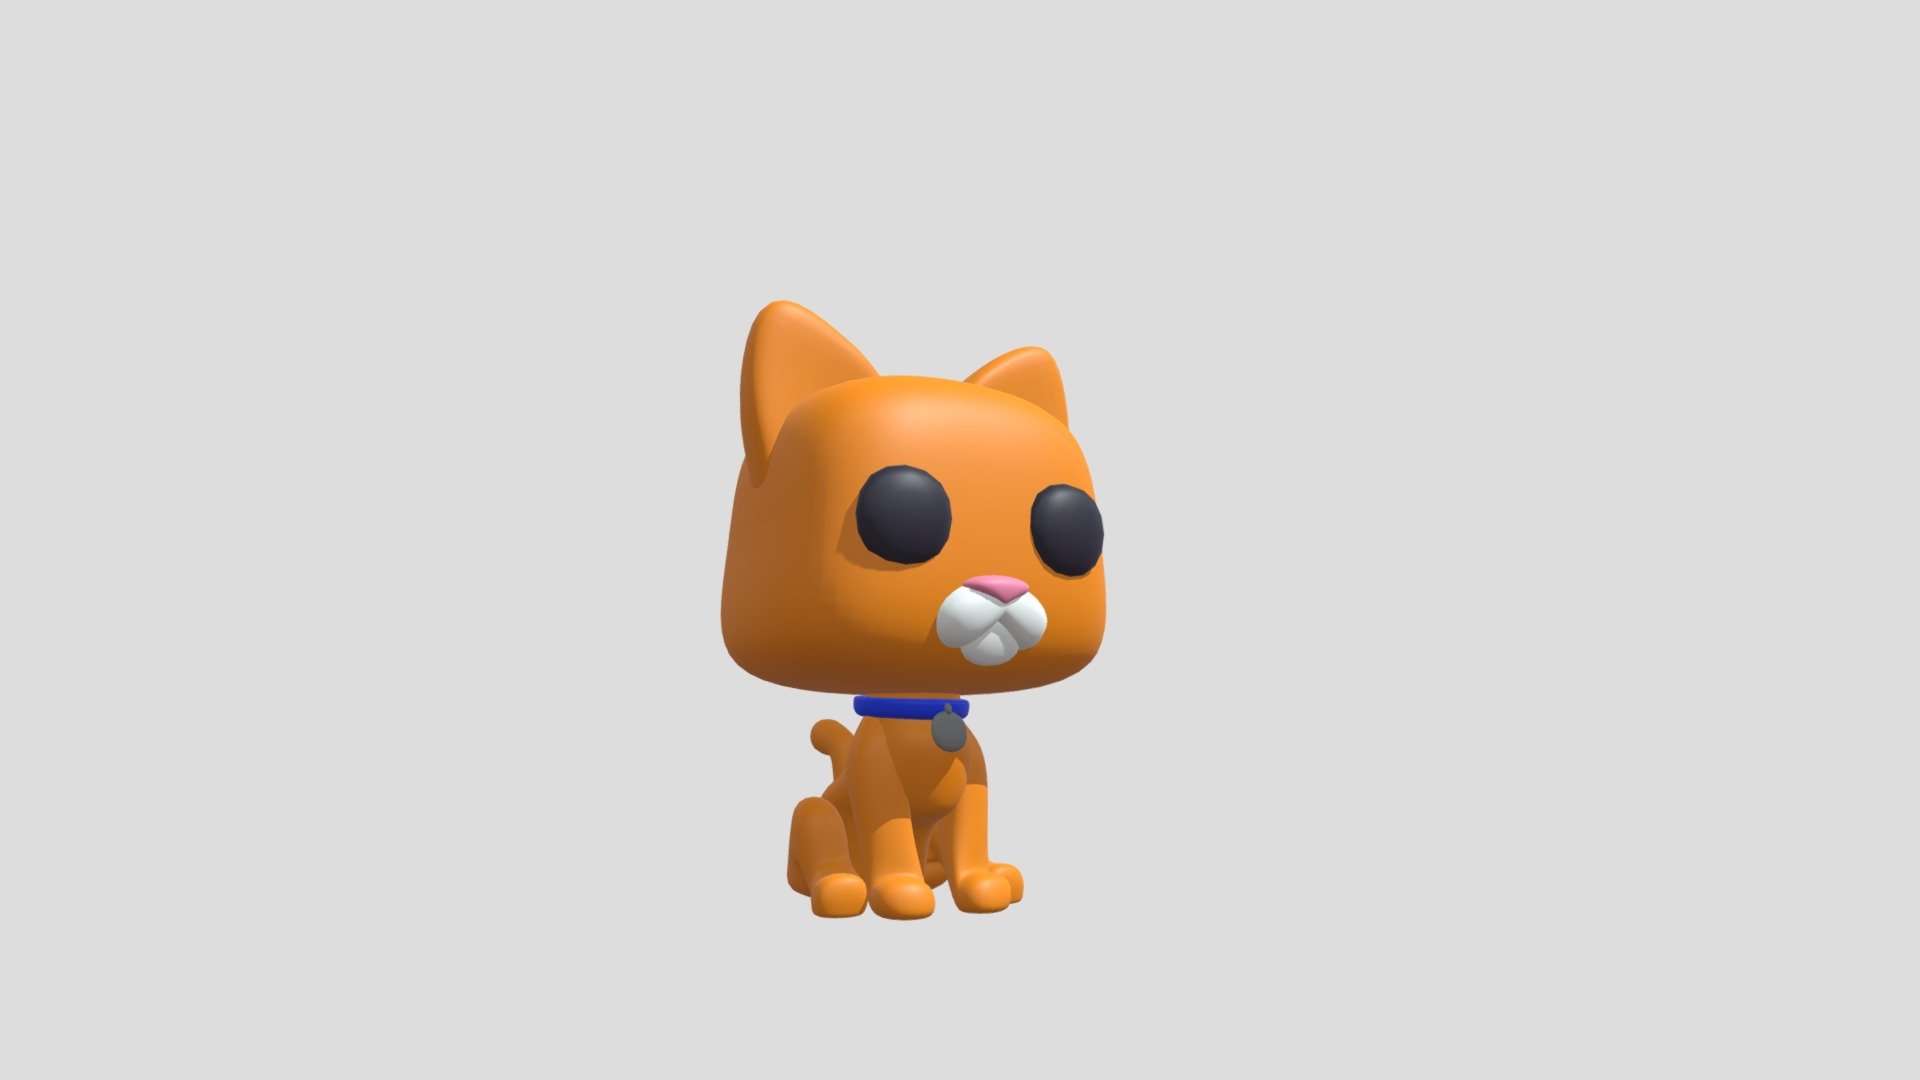 Work in progress of my first 3d funko pop modeling practice of many that I want to recreate in Blender 3d model